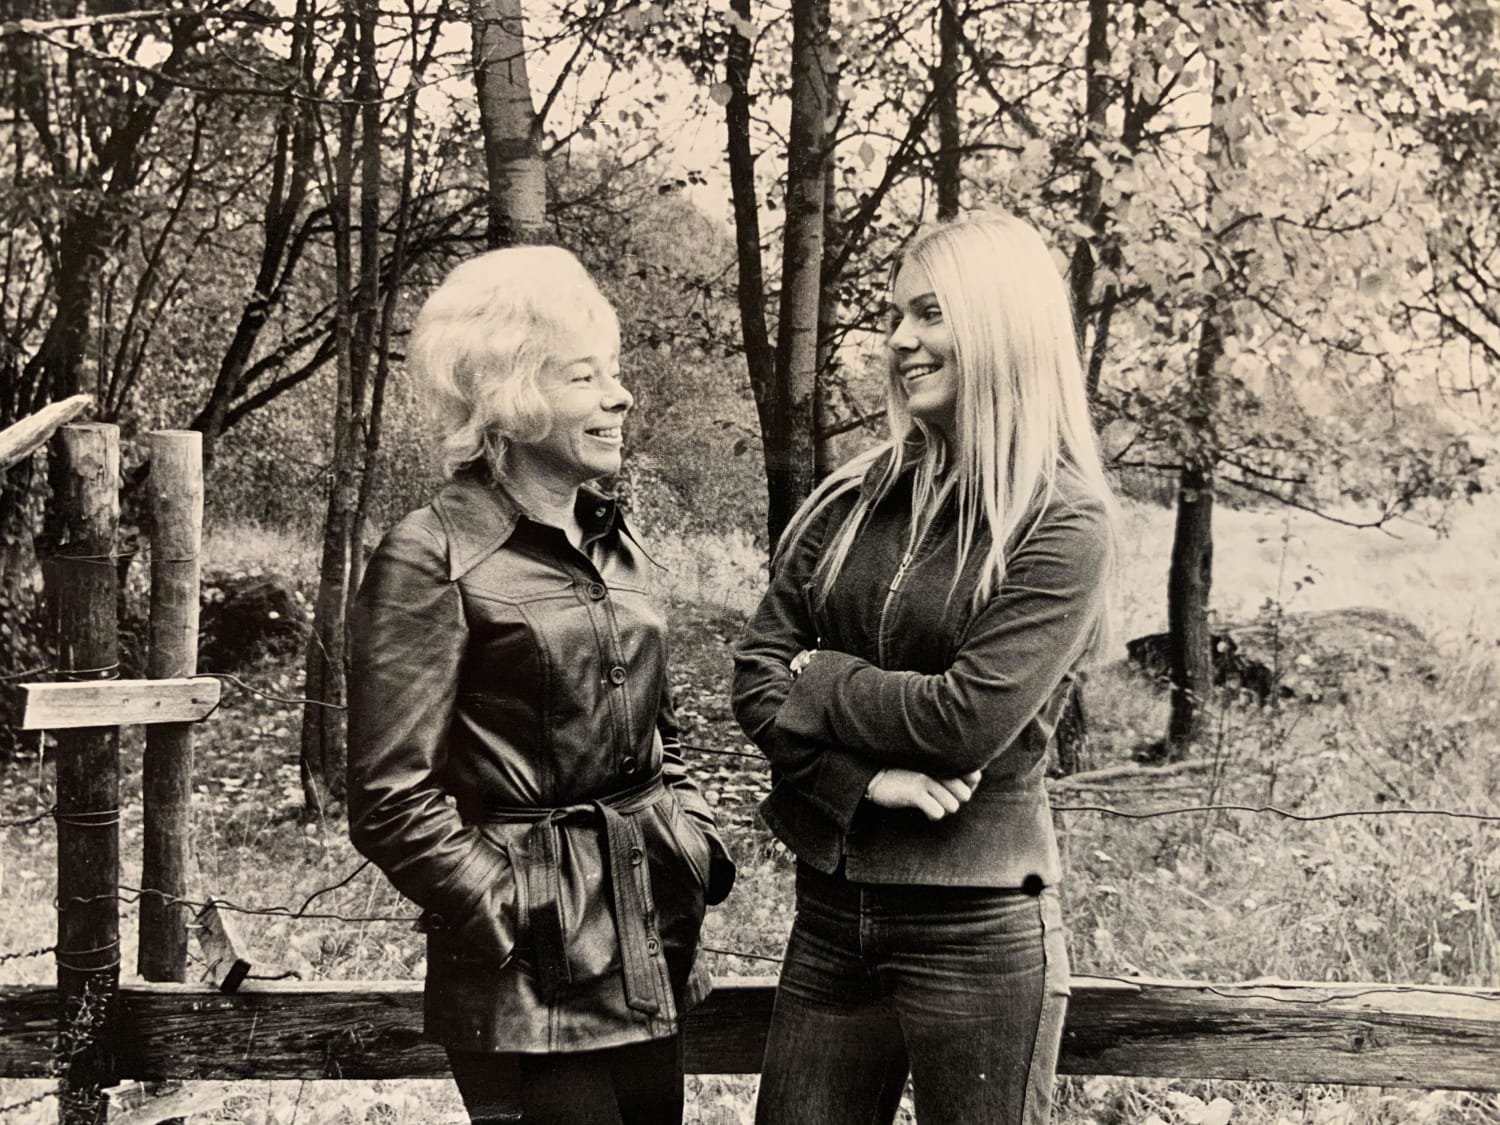 My mother and grandmother, ca 1970.